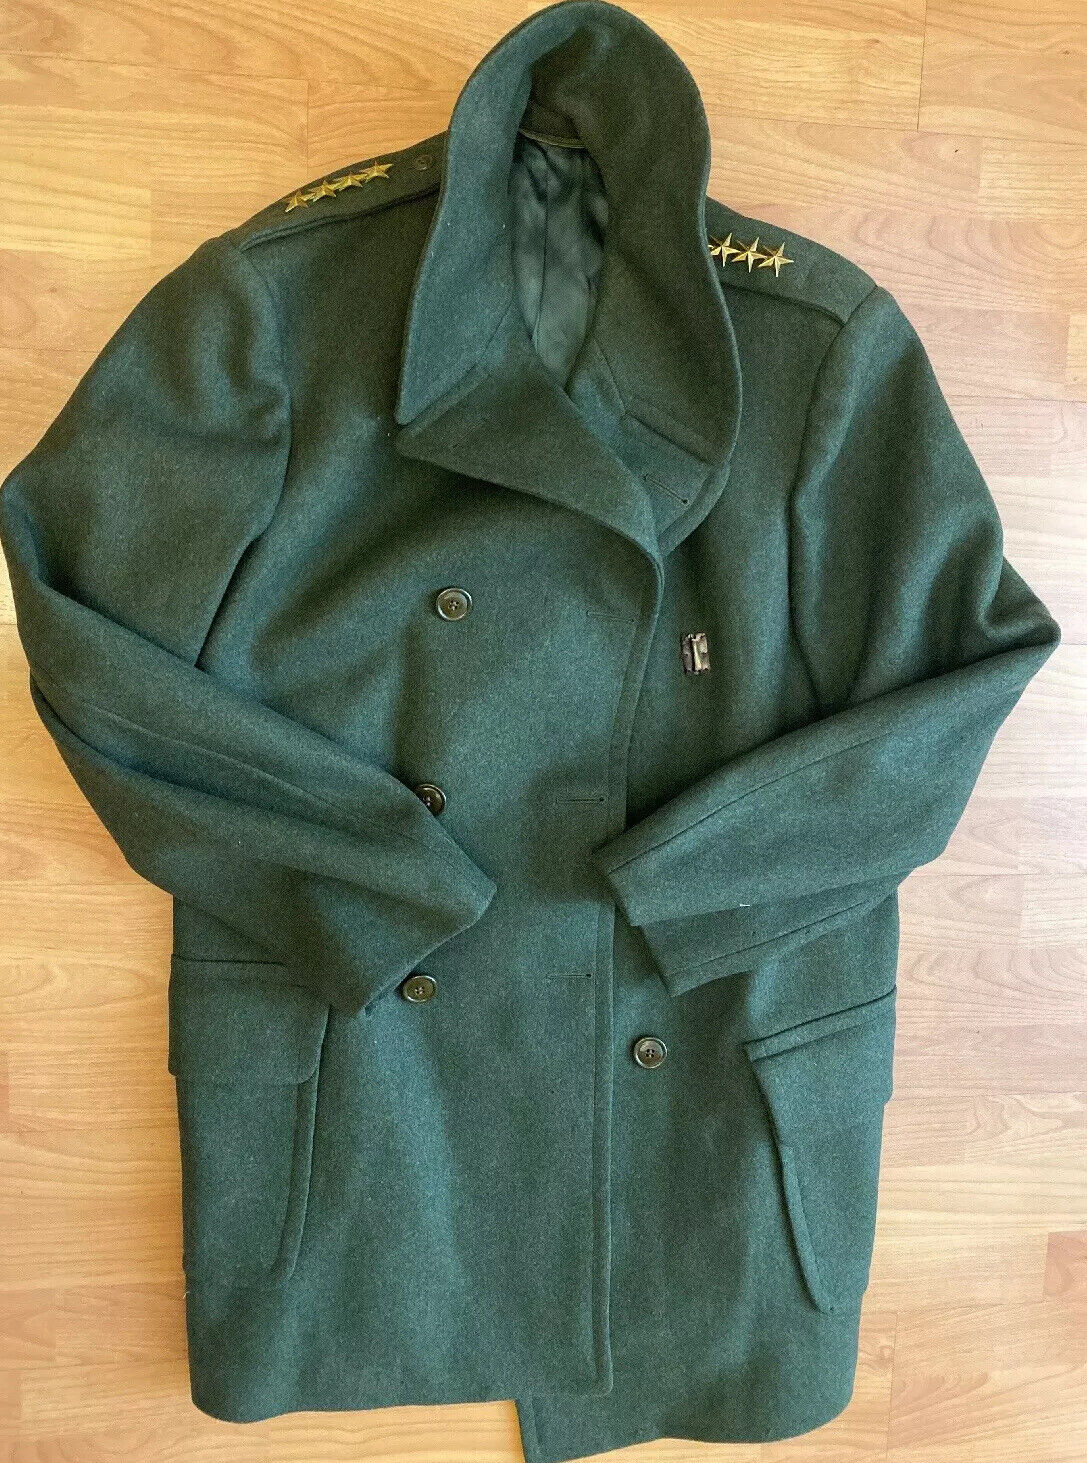 1955 US UNION MADE MILITARY Coat 44 With Meyer or HS MEYER 4 Star Bar Pins Rare